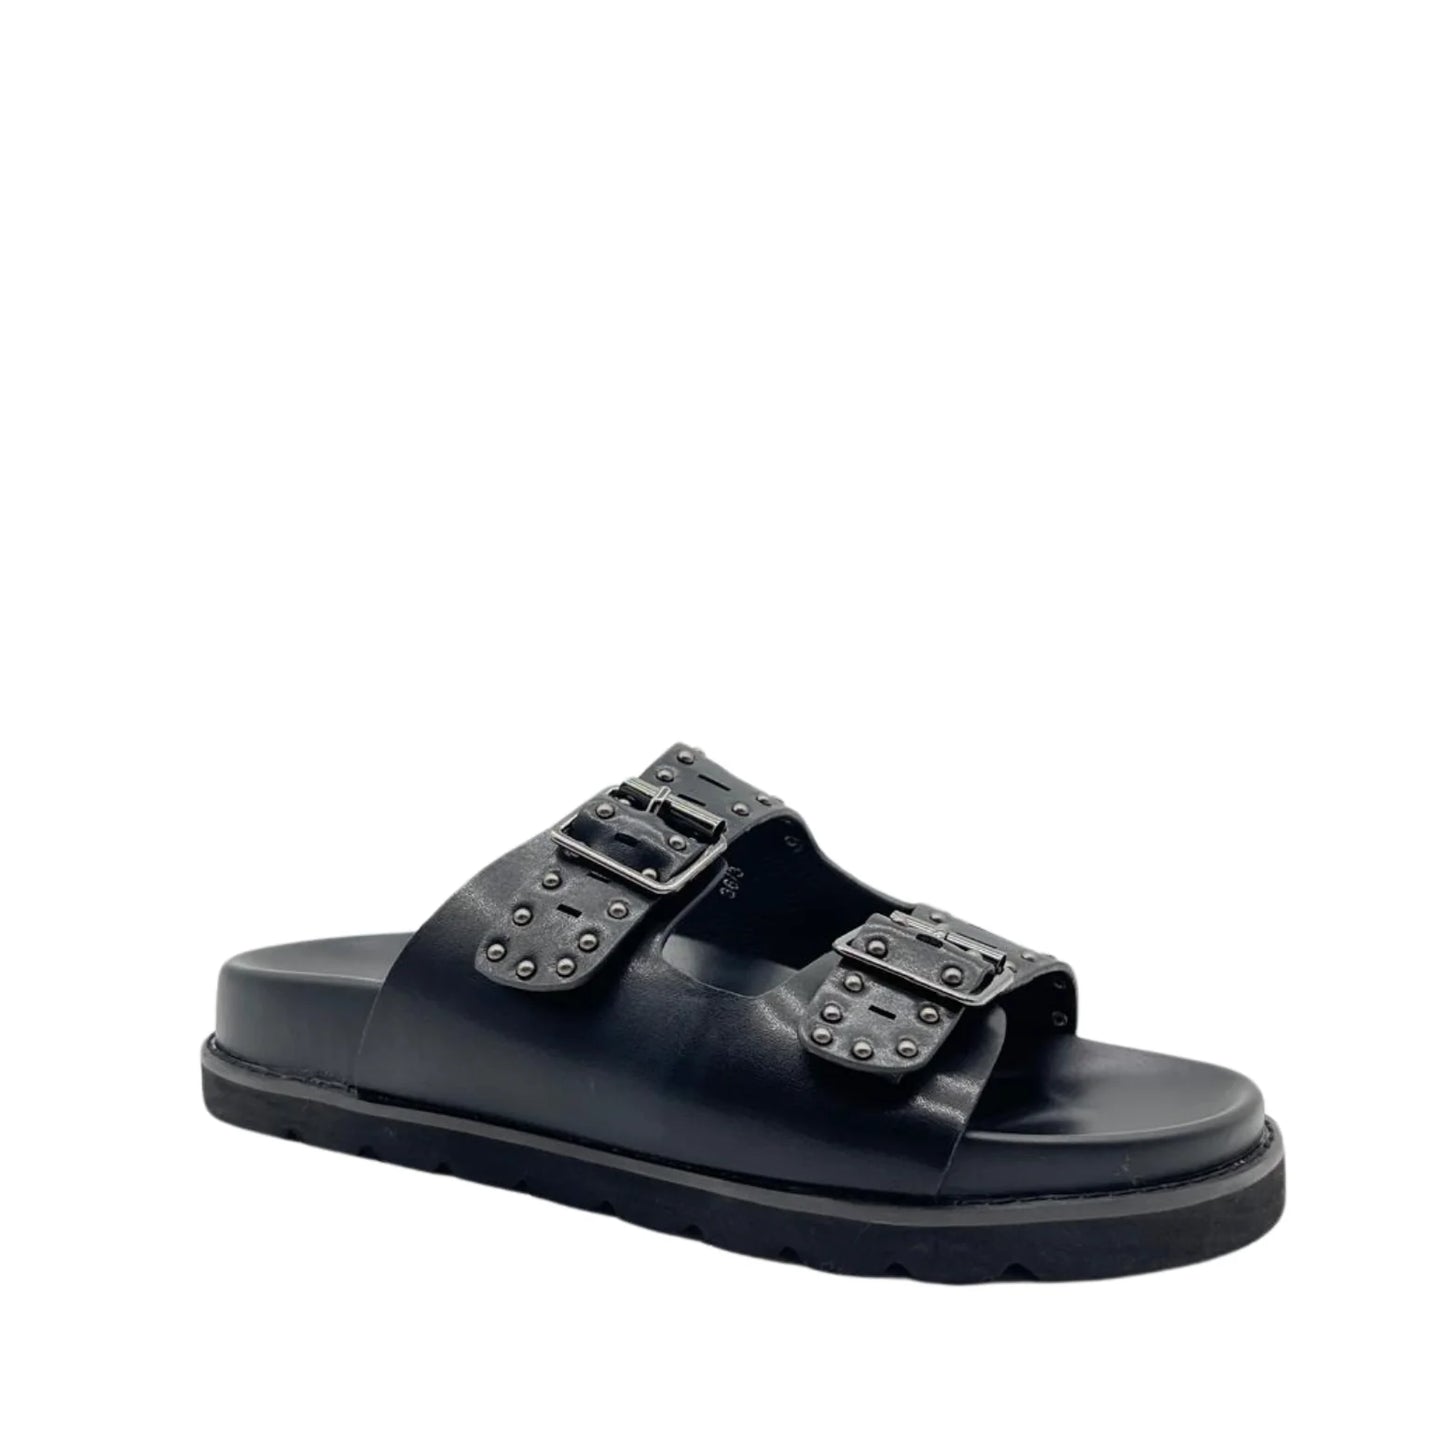 Drilleys Double Buckle Studded Sandals - Ink Black